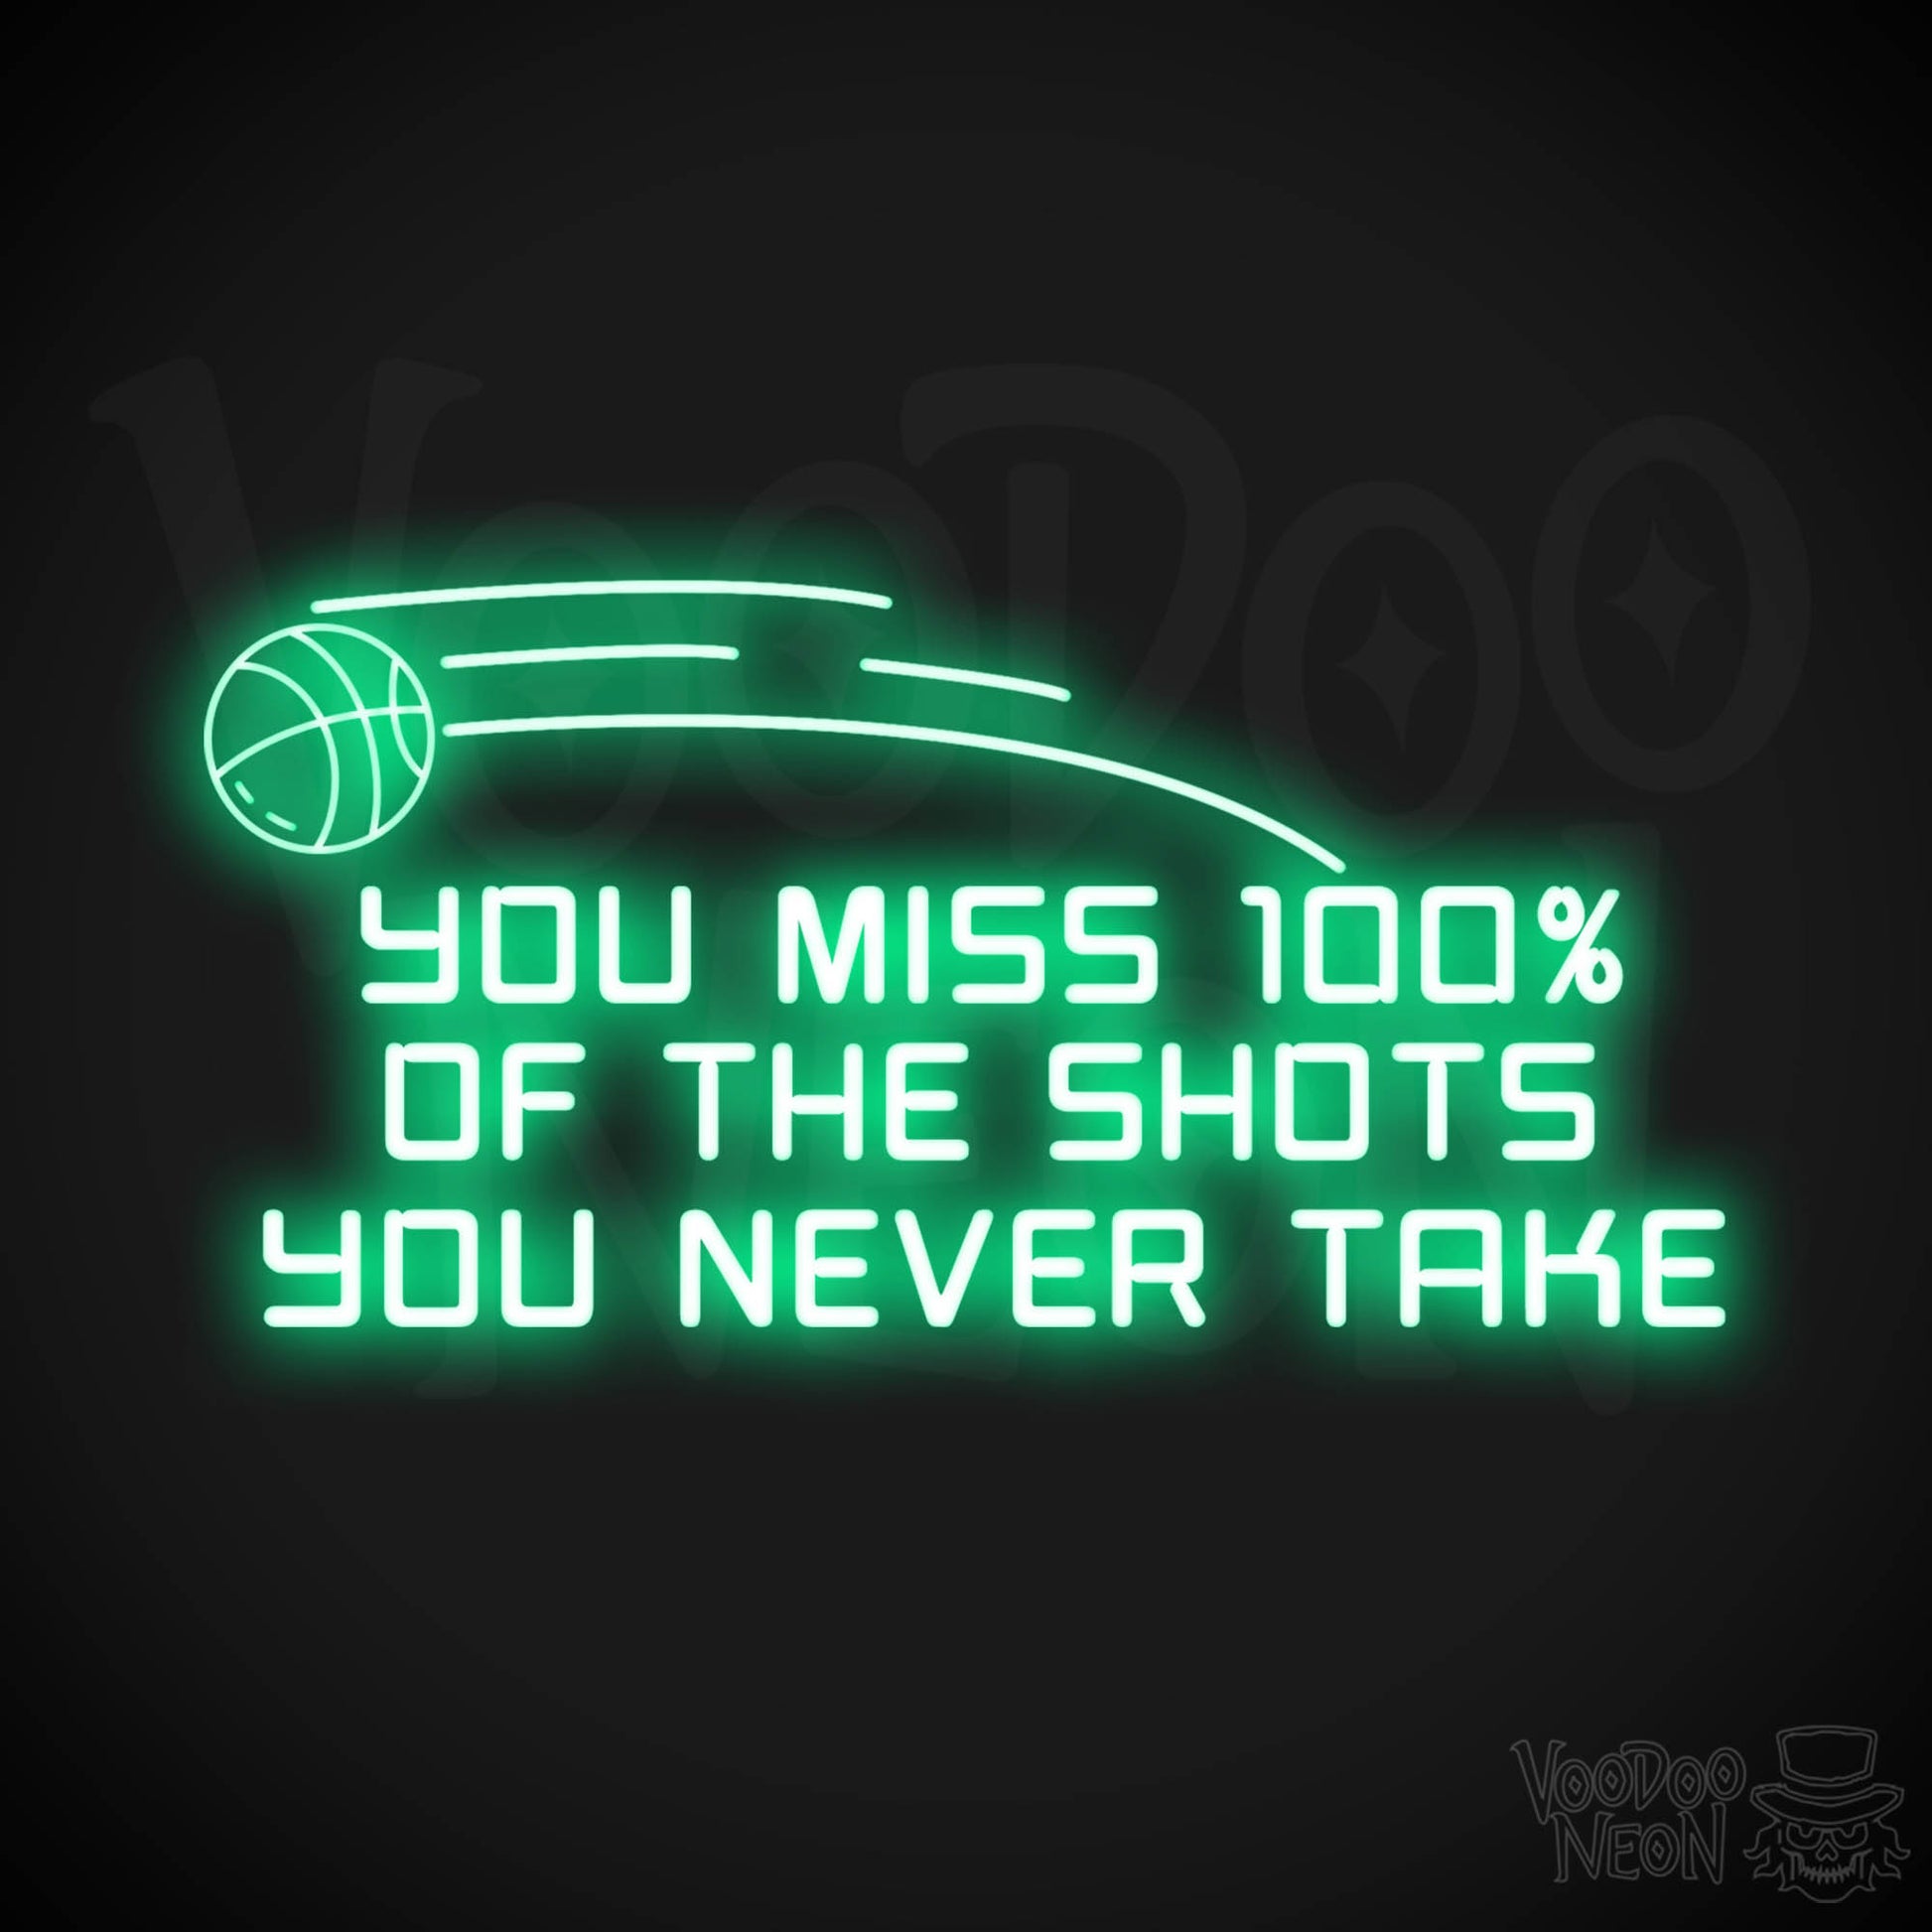 You Miss 100% of the Shots You Never Take Neon Sign - Neon Wall Art - Inspirational Signs - Color Green